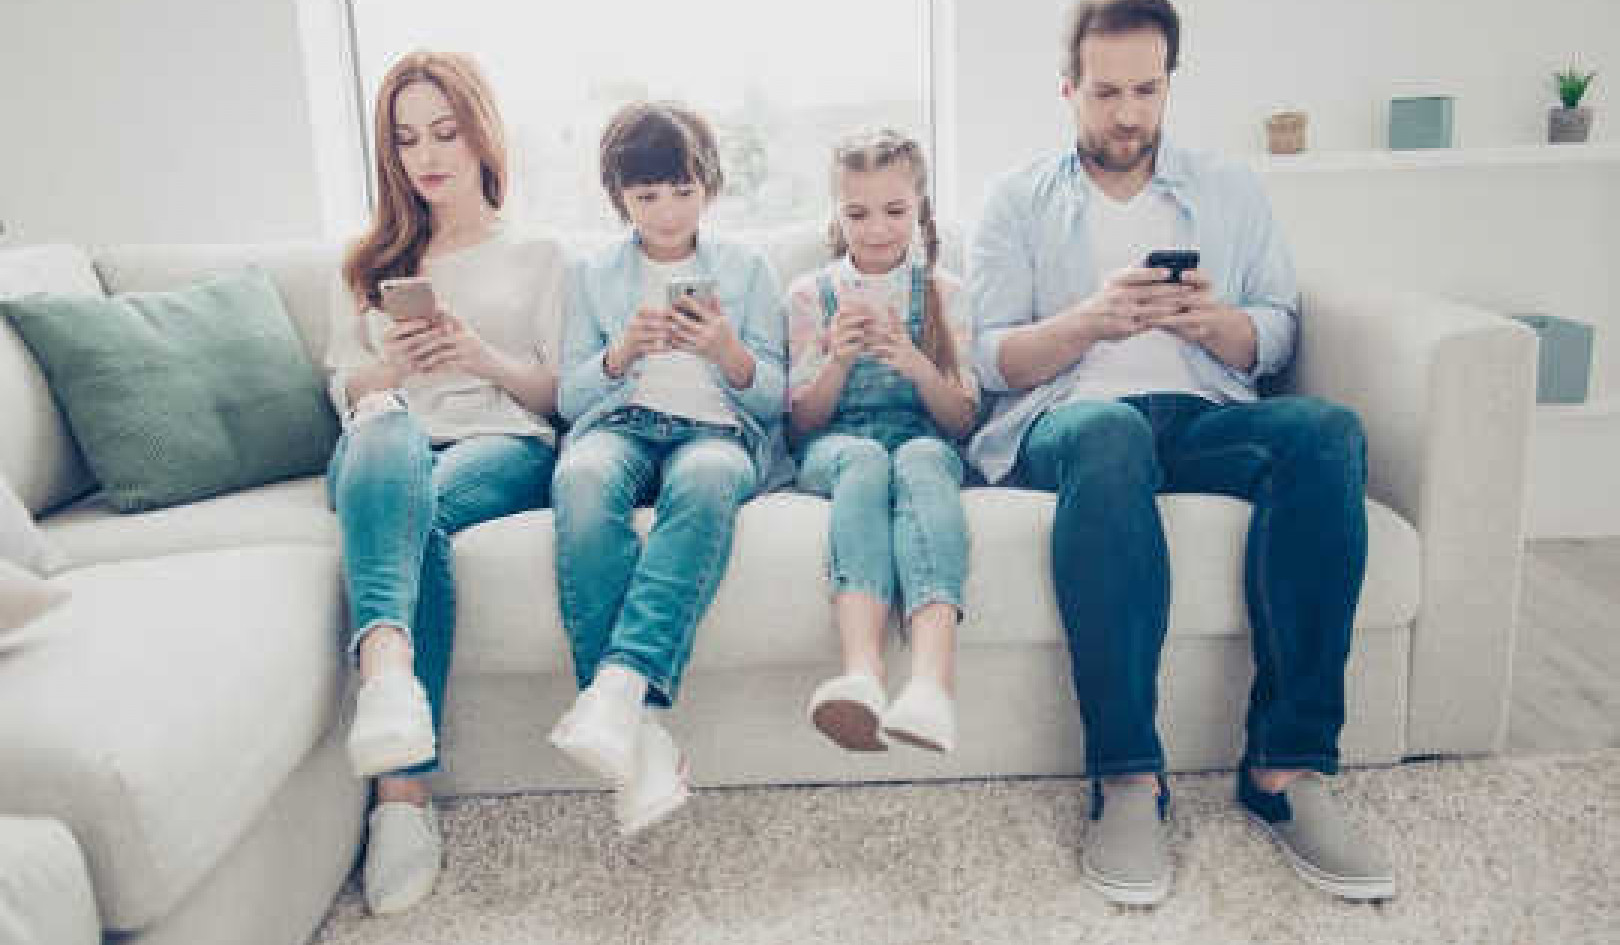 How Mobile Devices Have Changed Family Time